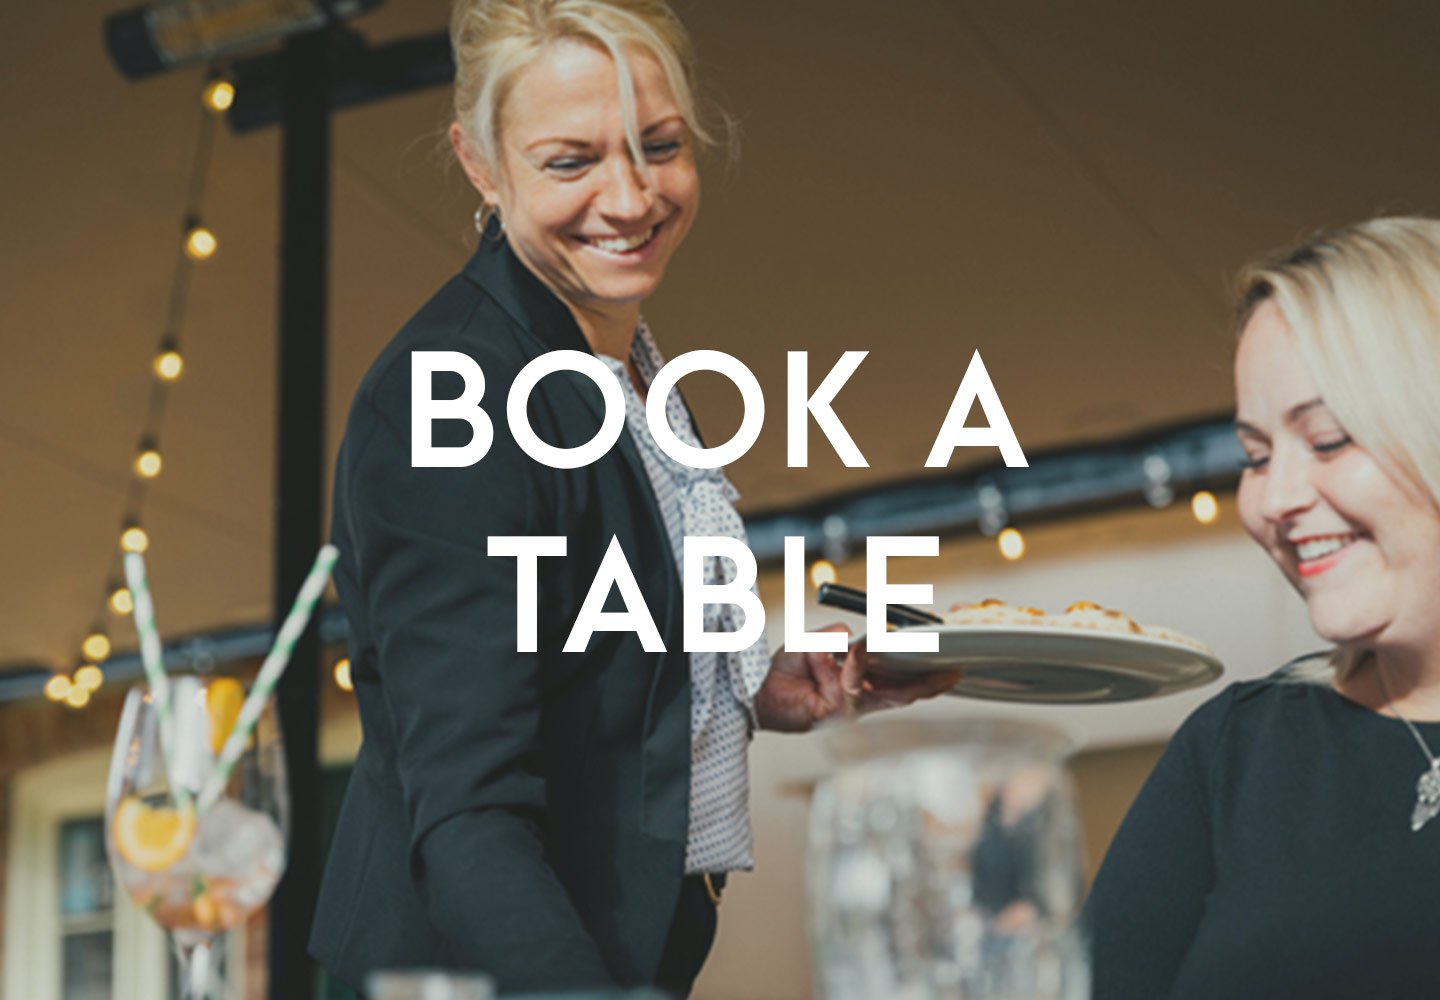 Book-a-table-at-your-local-pub-and-restaurant.jpg